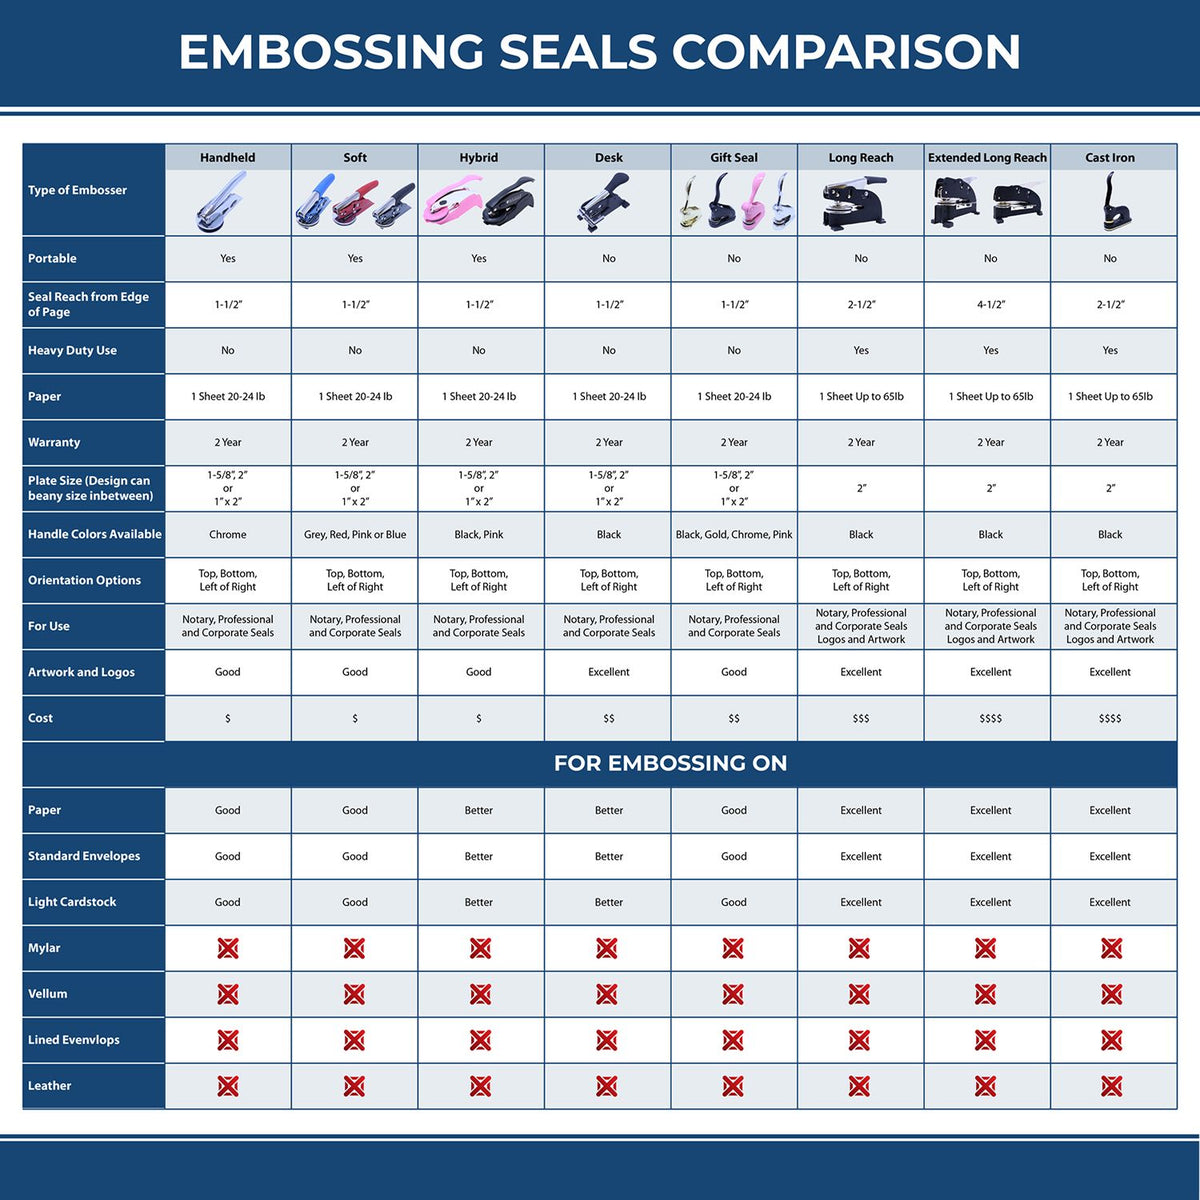 A comparison chart for the different types of mount models available for the State of Tennessee Long Reach Architectural Embossing Seal.